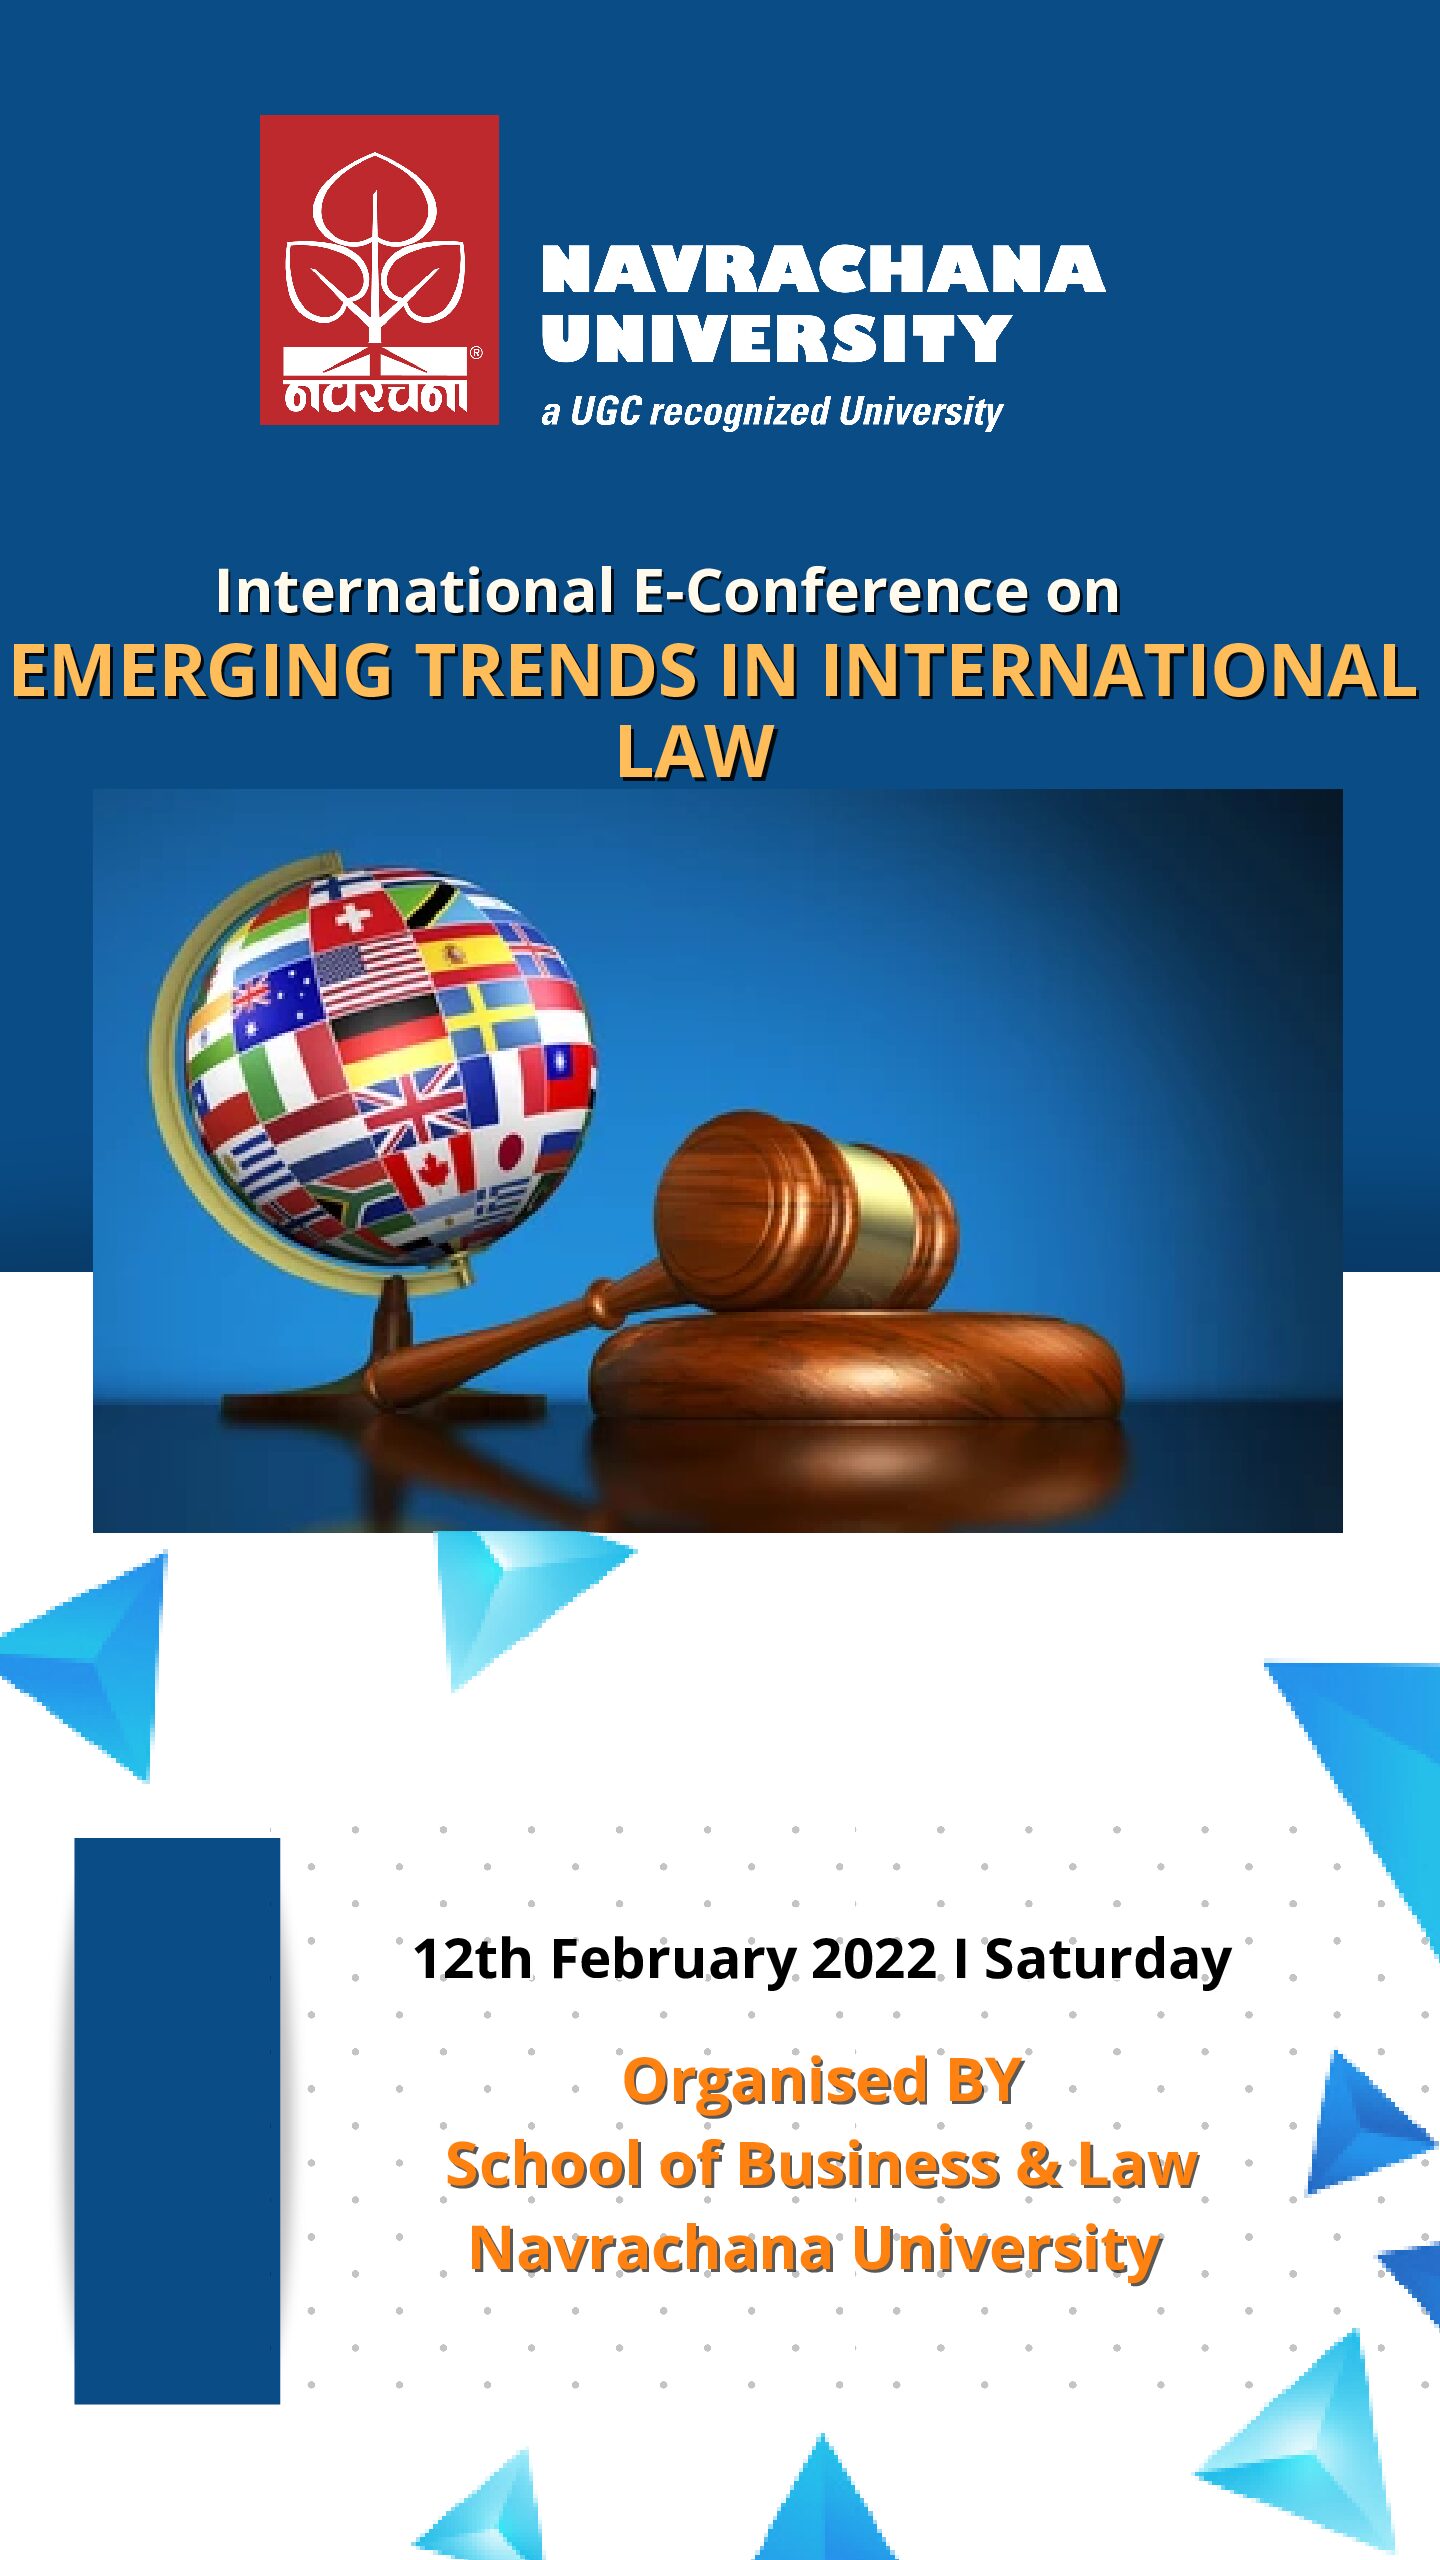 International EConference for law students on Emerging Trends in